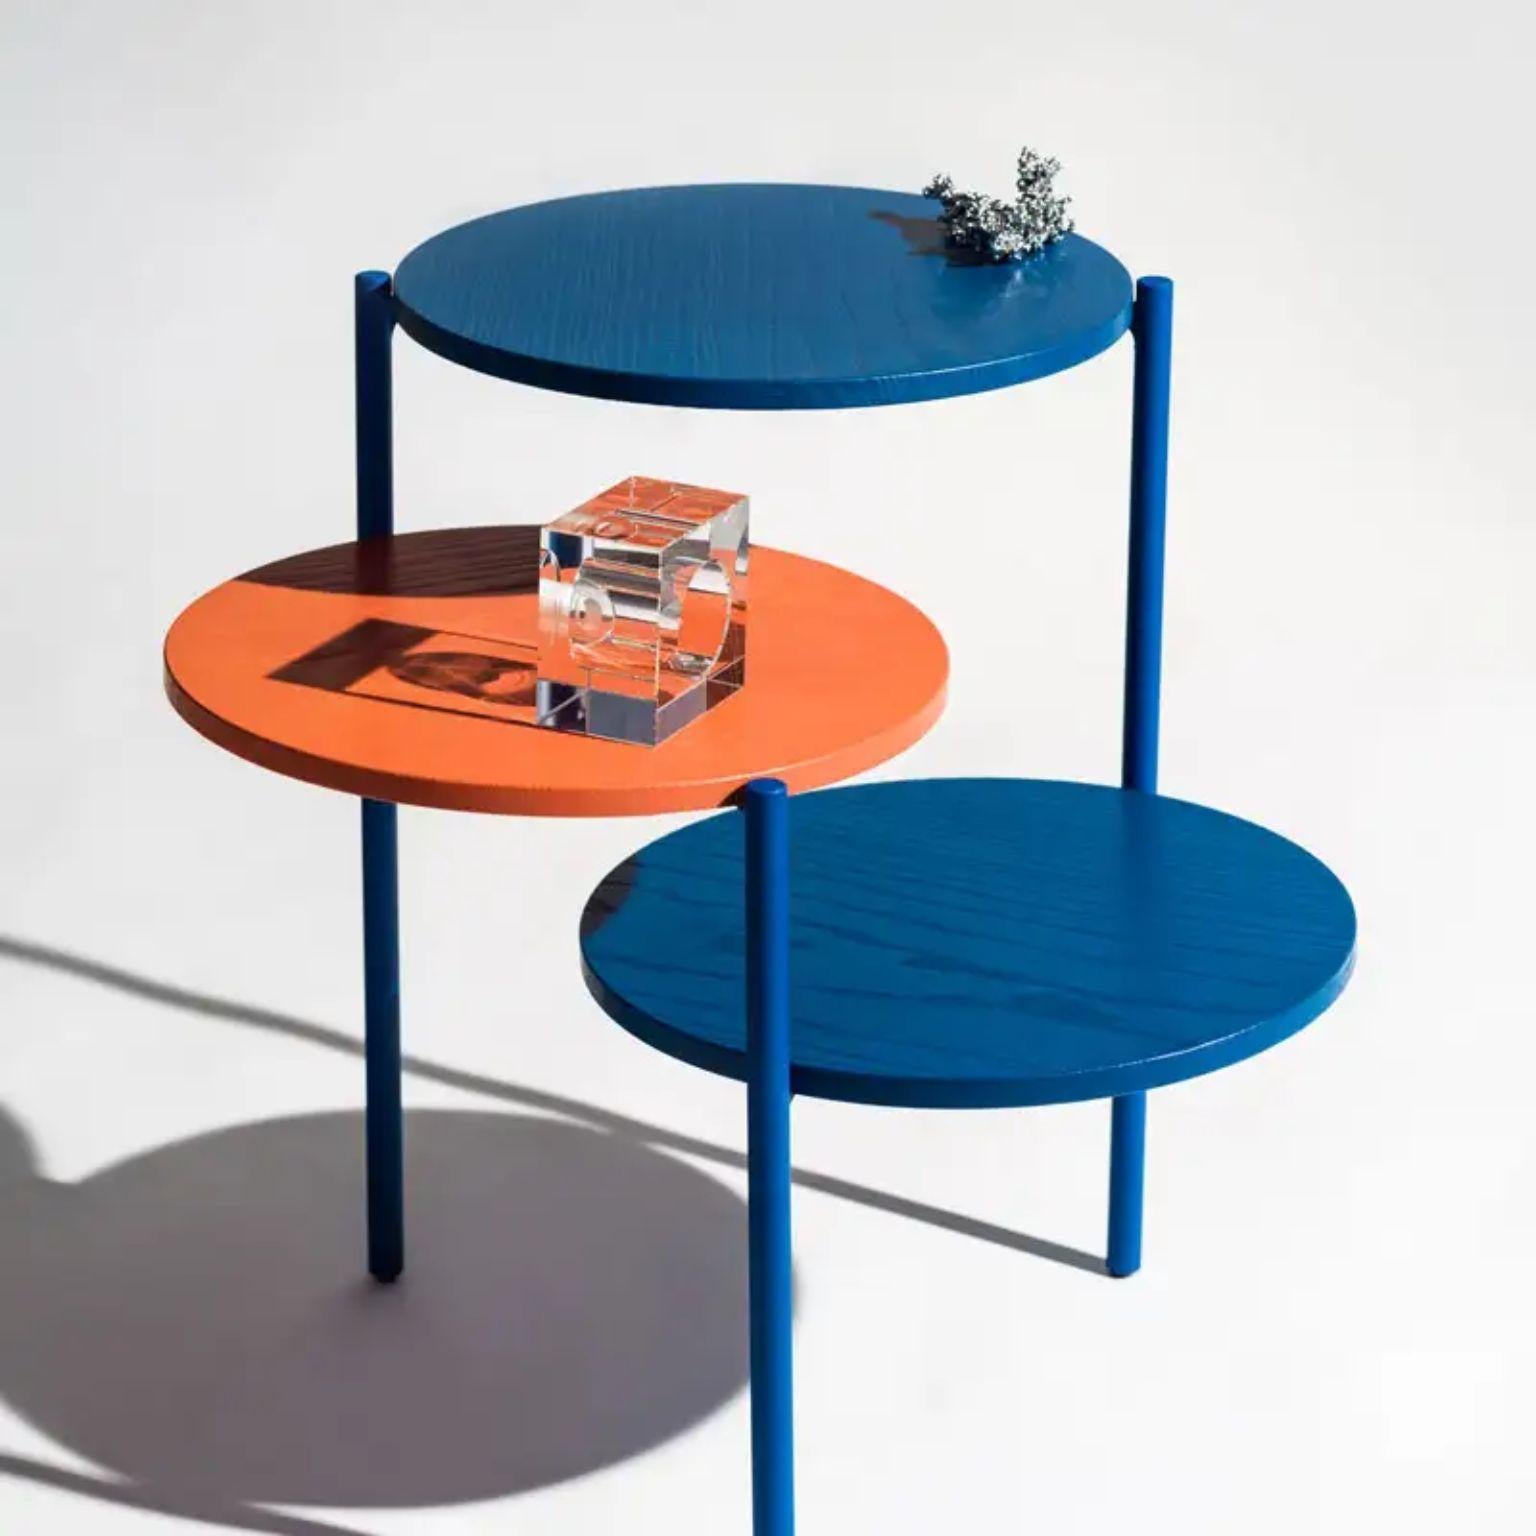 Triplo orange and blue coffee table by Mason Editions
Designed by Martina Bartoli.
Dimensions: Ø 54 cm x H 52.5 cm.
Materials: Ash solid wood and metal.

Available in different colors and finishes.

A design based on the concept of dissecting